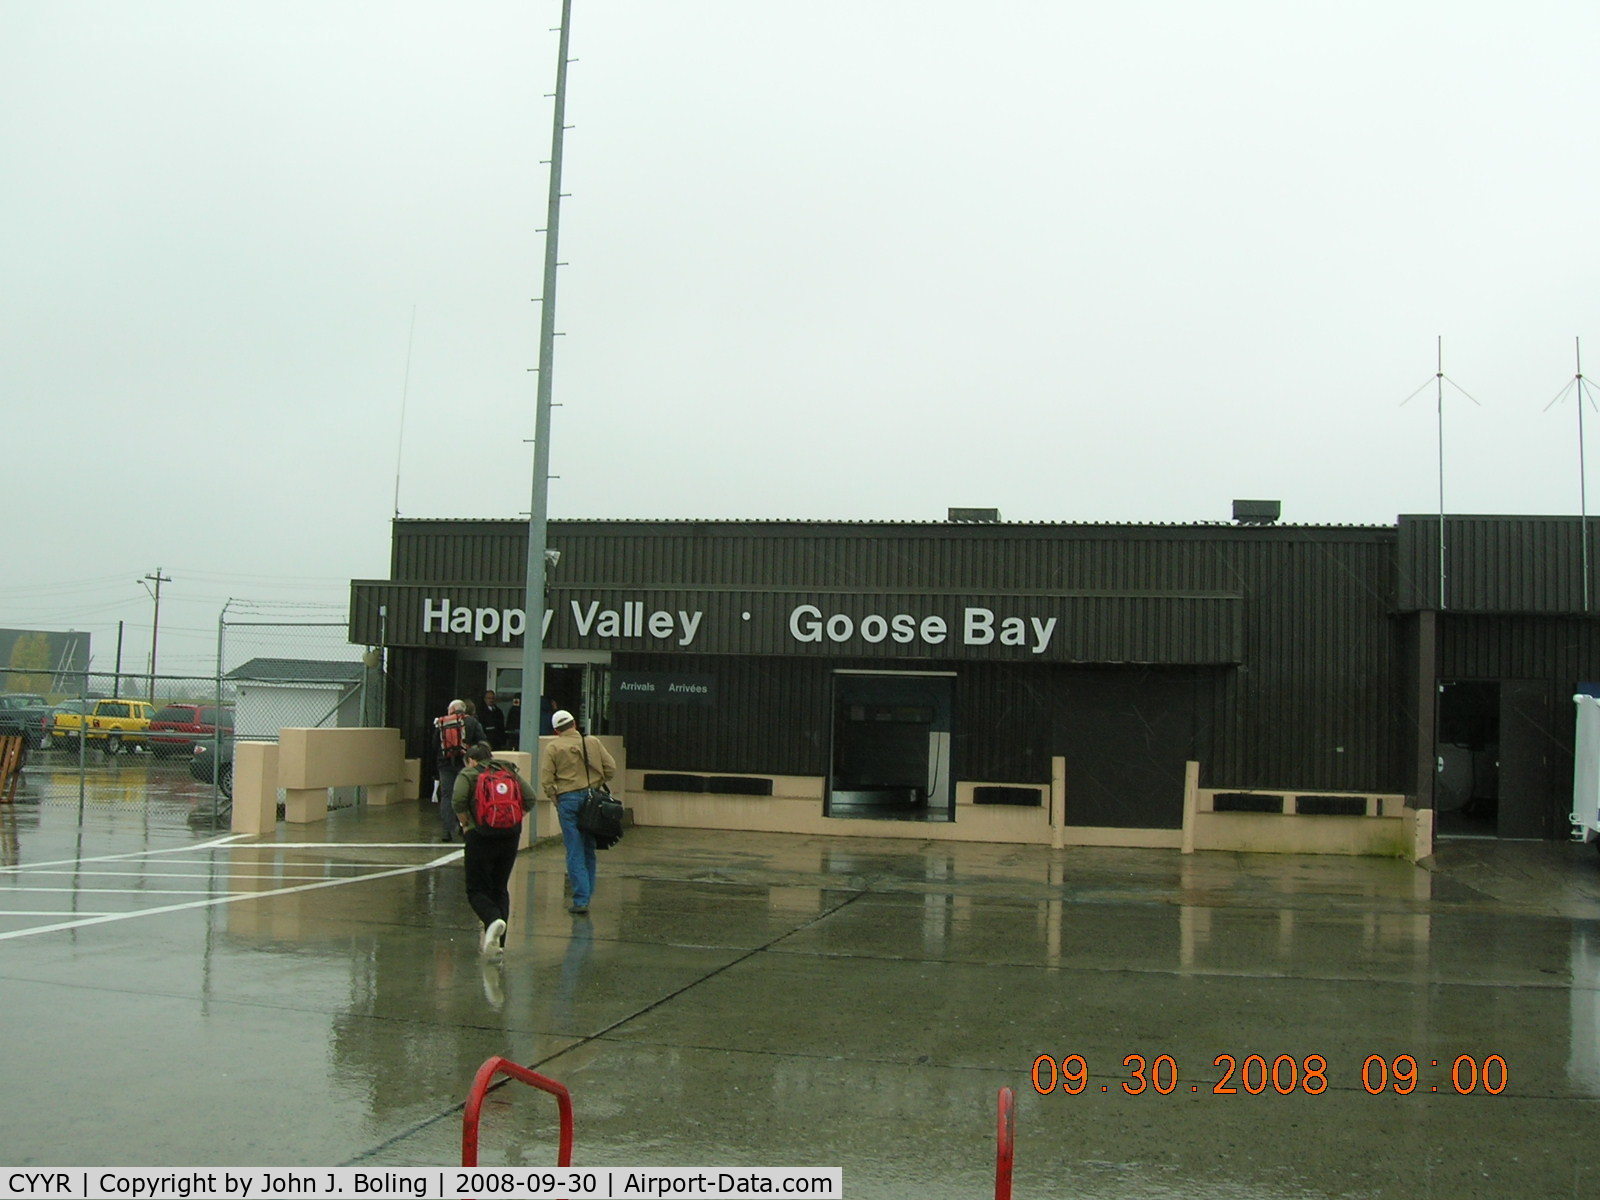 CFB Goose Bay (Goose Bay Airport), Happy Valley-Goose Bay, Newfoundland and Labrador Canada (CYYR) - Goose Bay Labrador. 1000 miles NE of New York City. Built as Canadian AFB. Was busiest airport in the world during WWII.